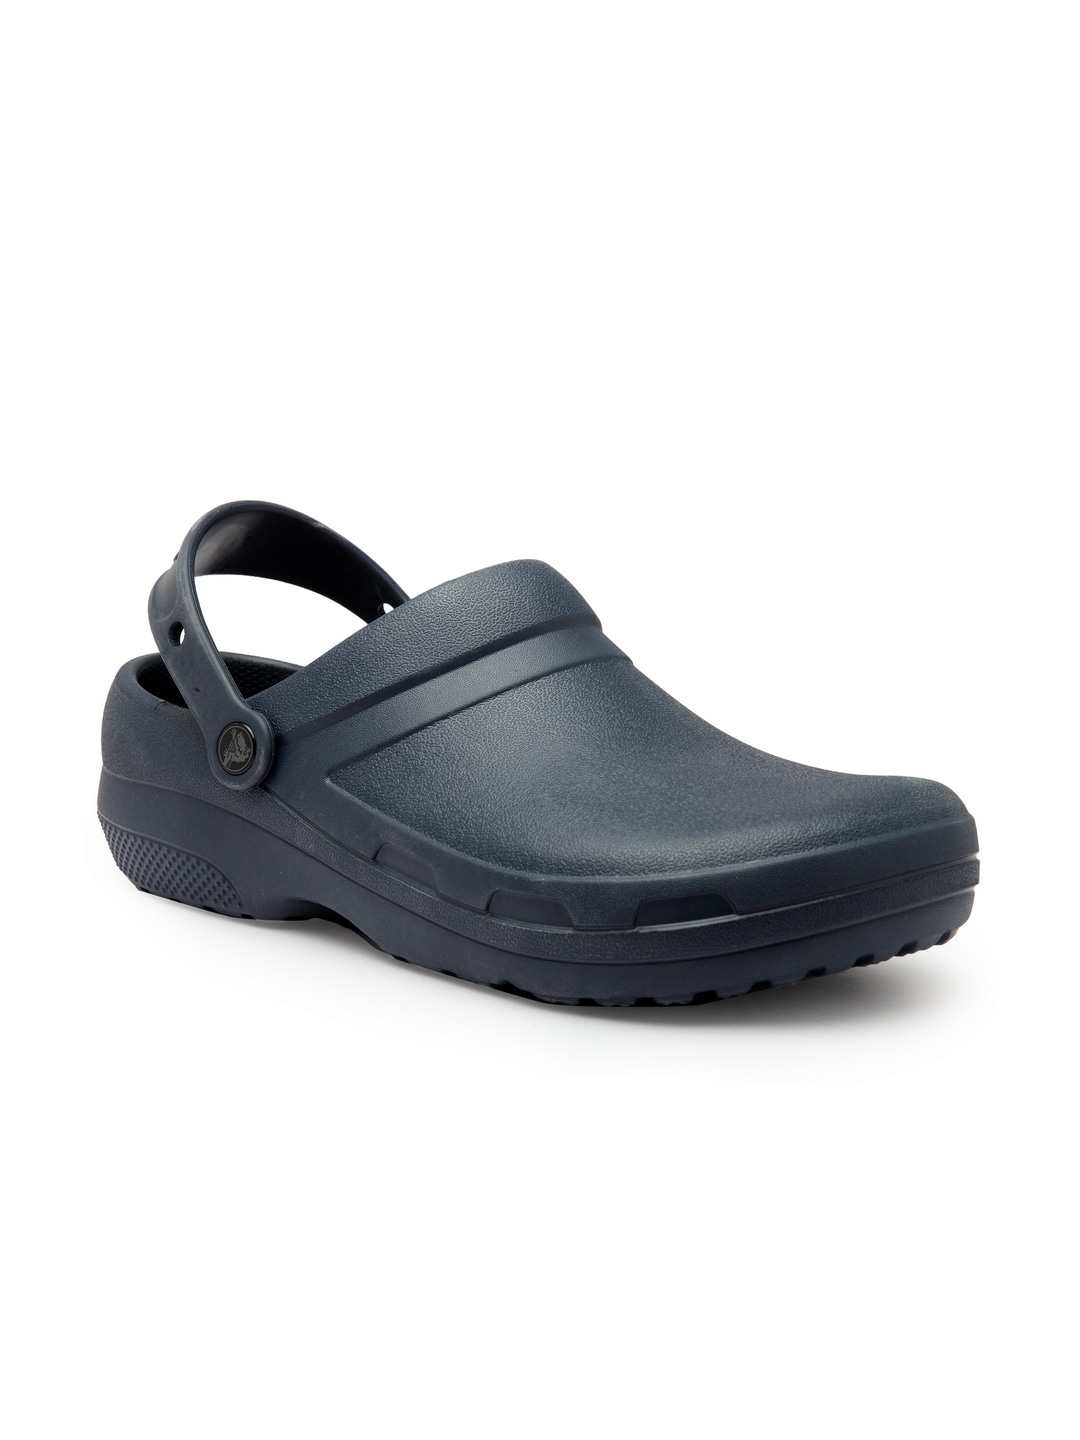 Crocs Classic Navy Blue Clogs for Men online in India at Best price on ...